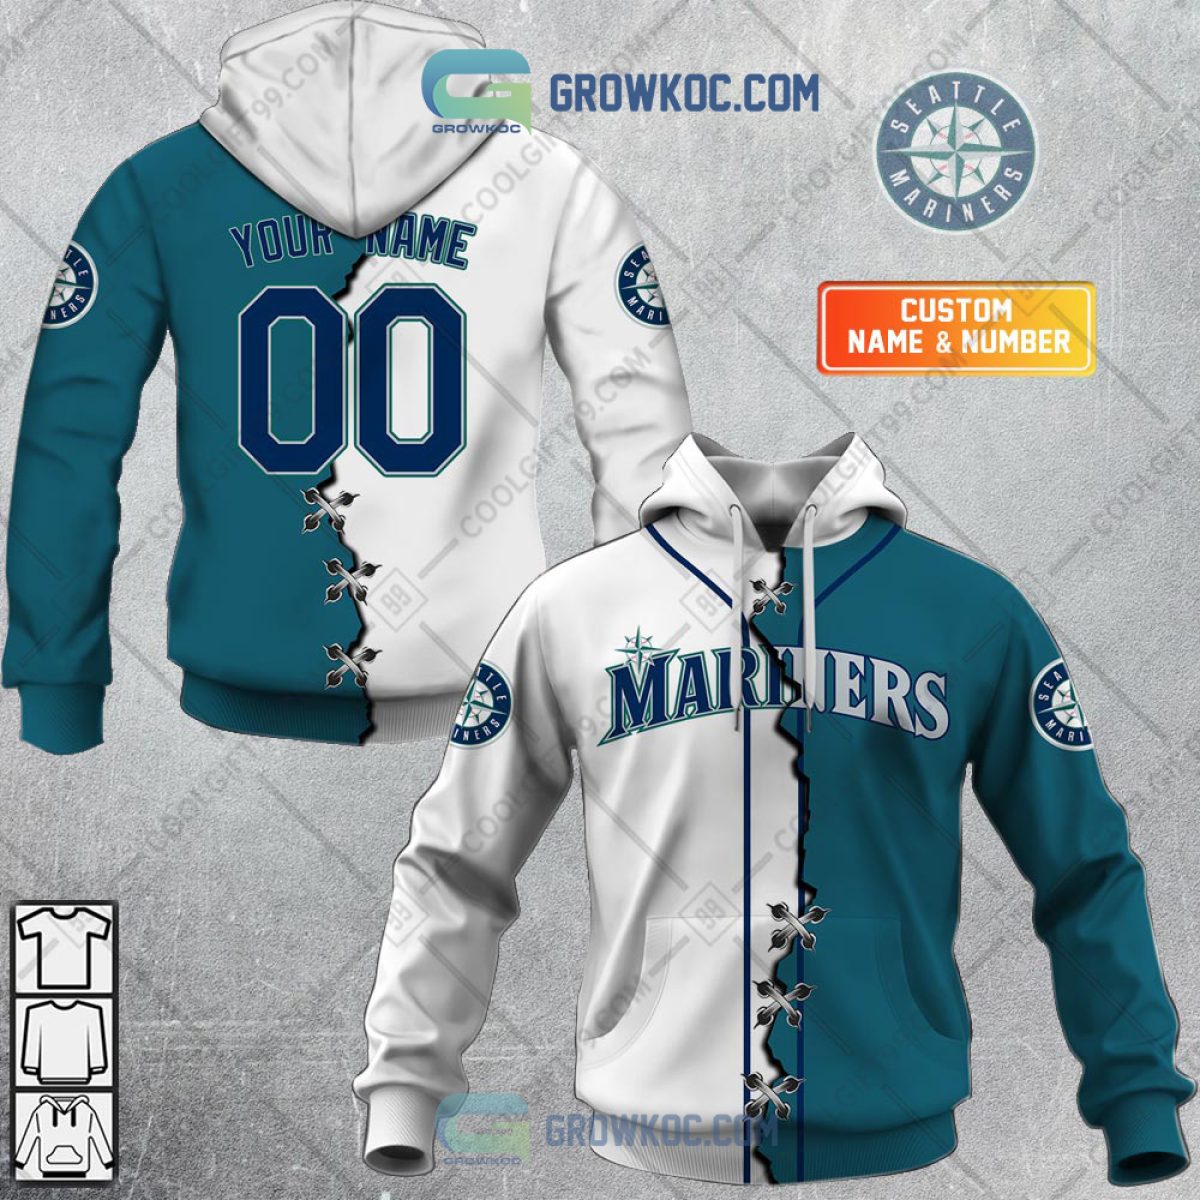 Mariners Pullover Blank Jersey size XL